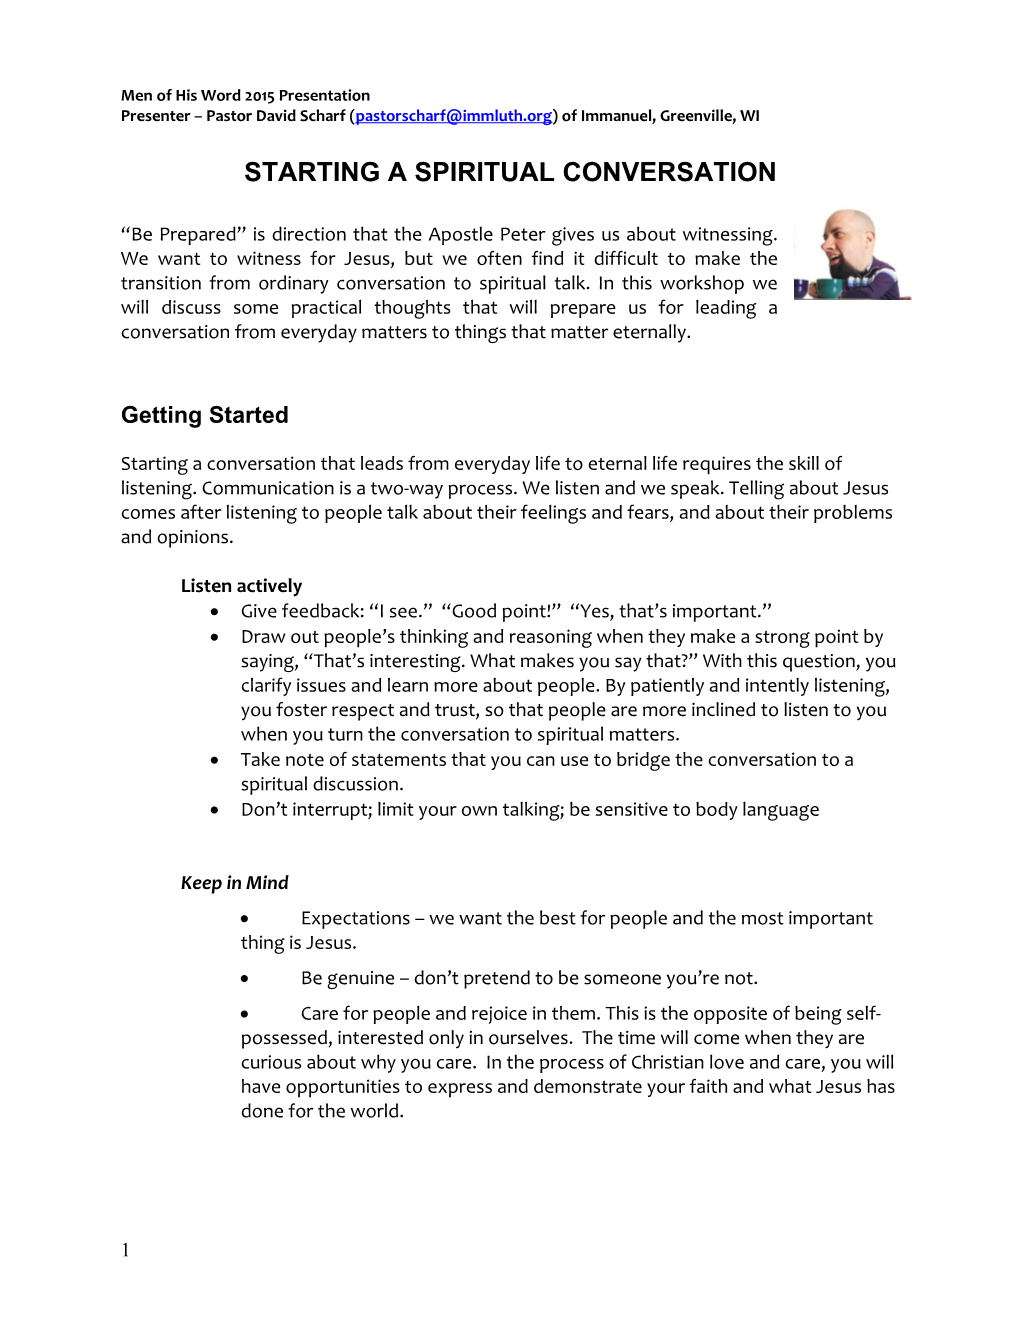 Going from Everyday Conversation to Spiritual Discussion Is Difficult for Most of Us